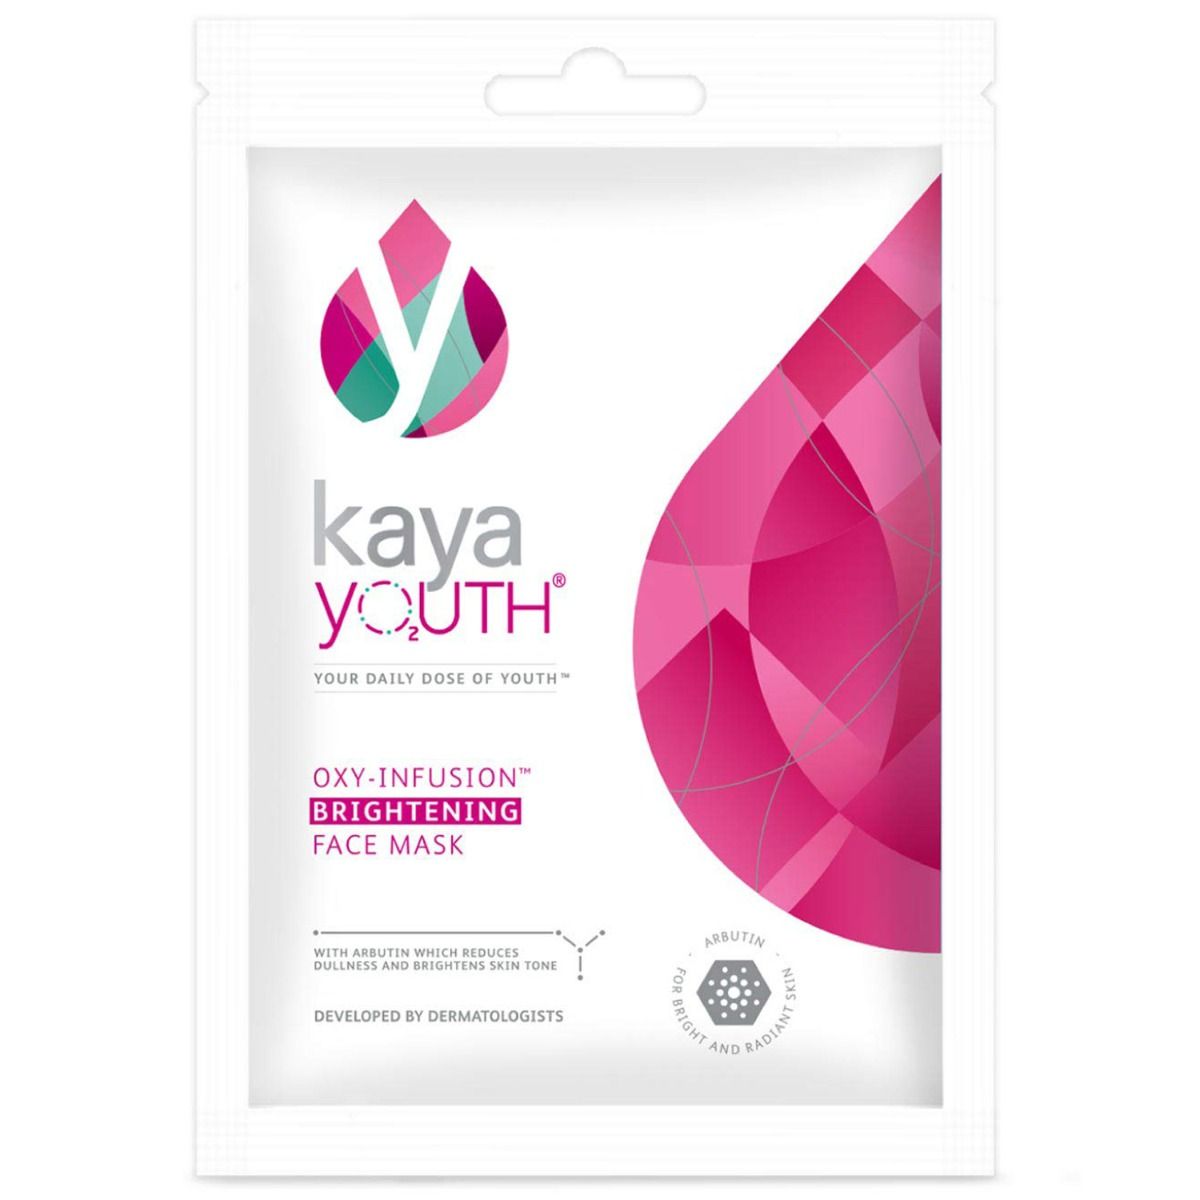 Kaya Youth Oxy-Infusion Brightening Face Mask, 20 gm, Pack of 1 